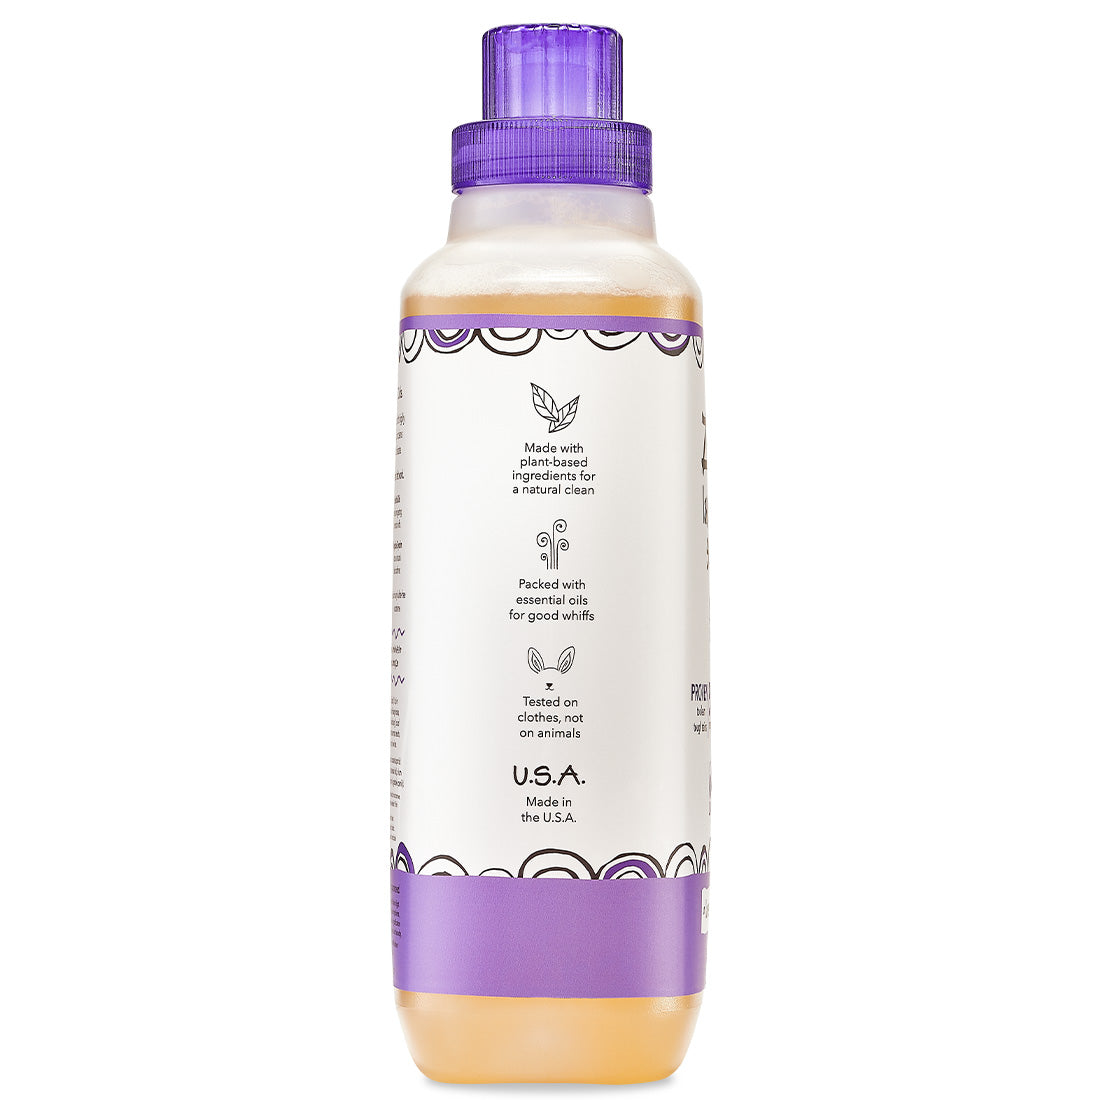 Side view of large bottle with screw cap containing Lavender Laundry Soap.